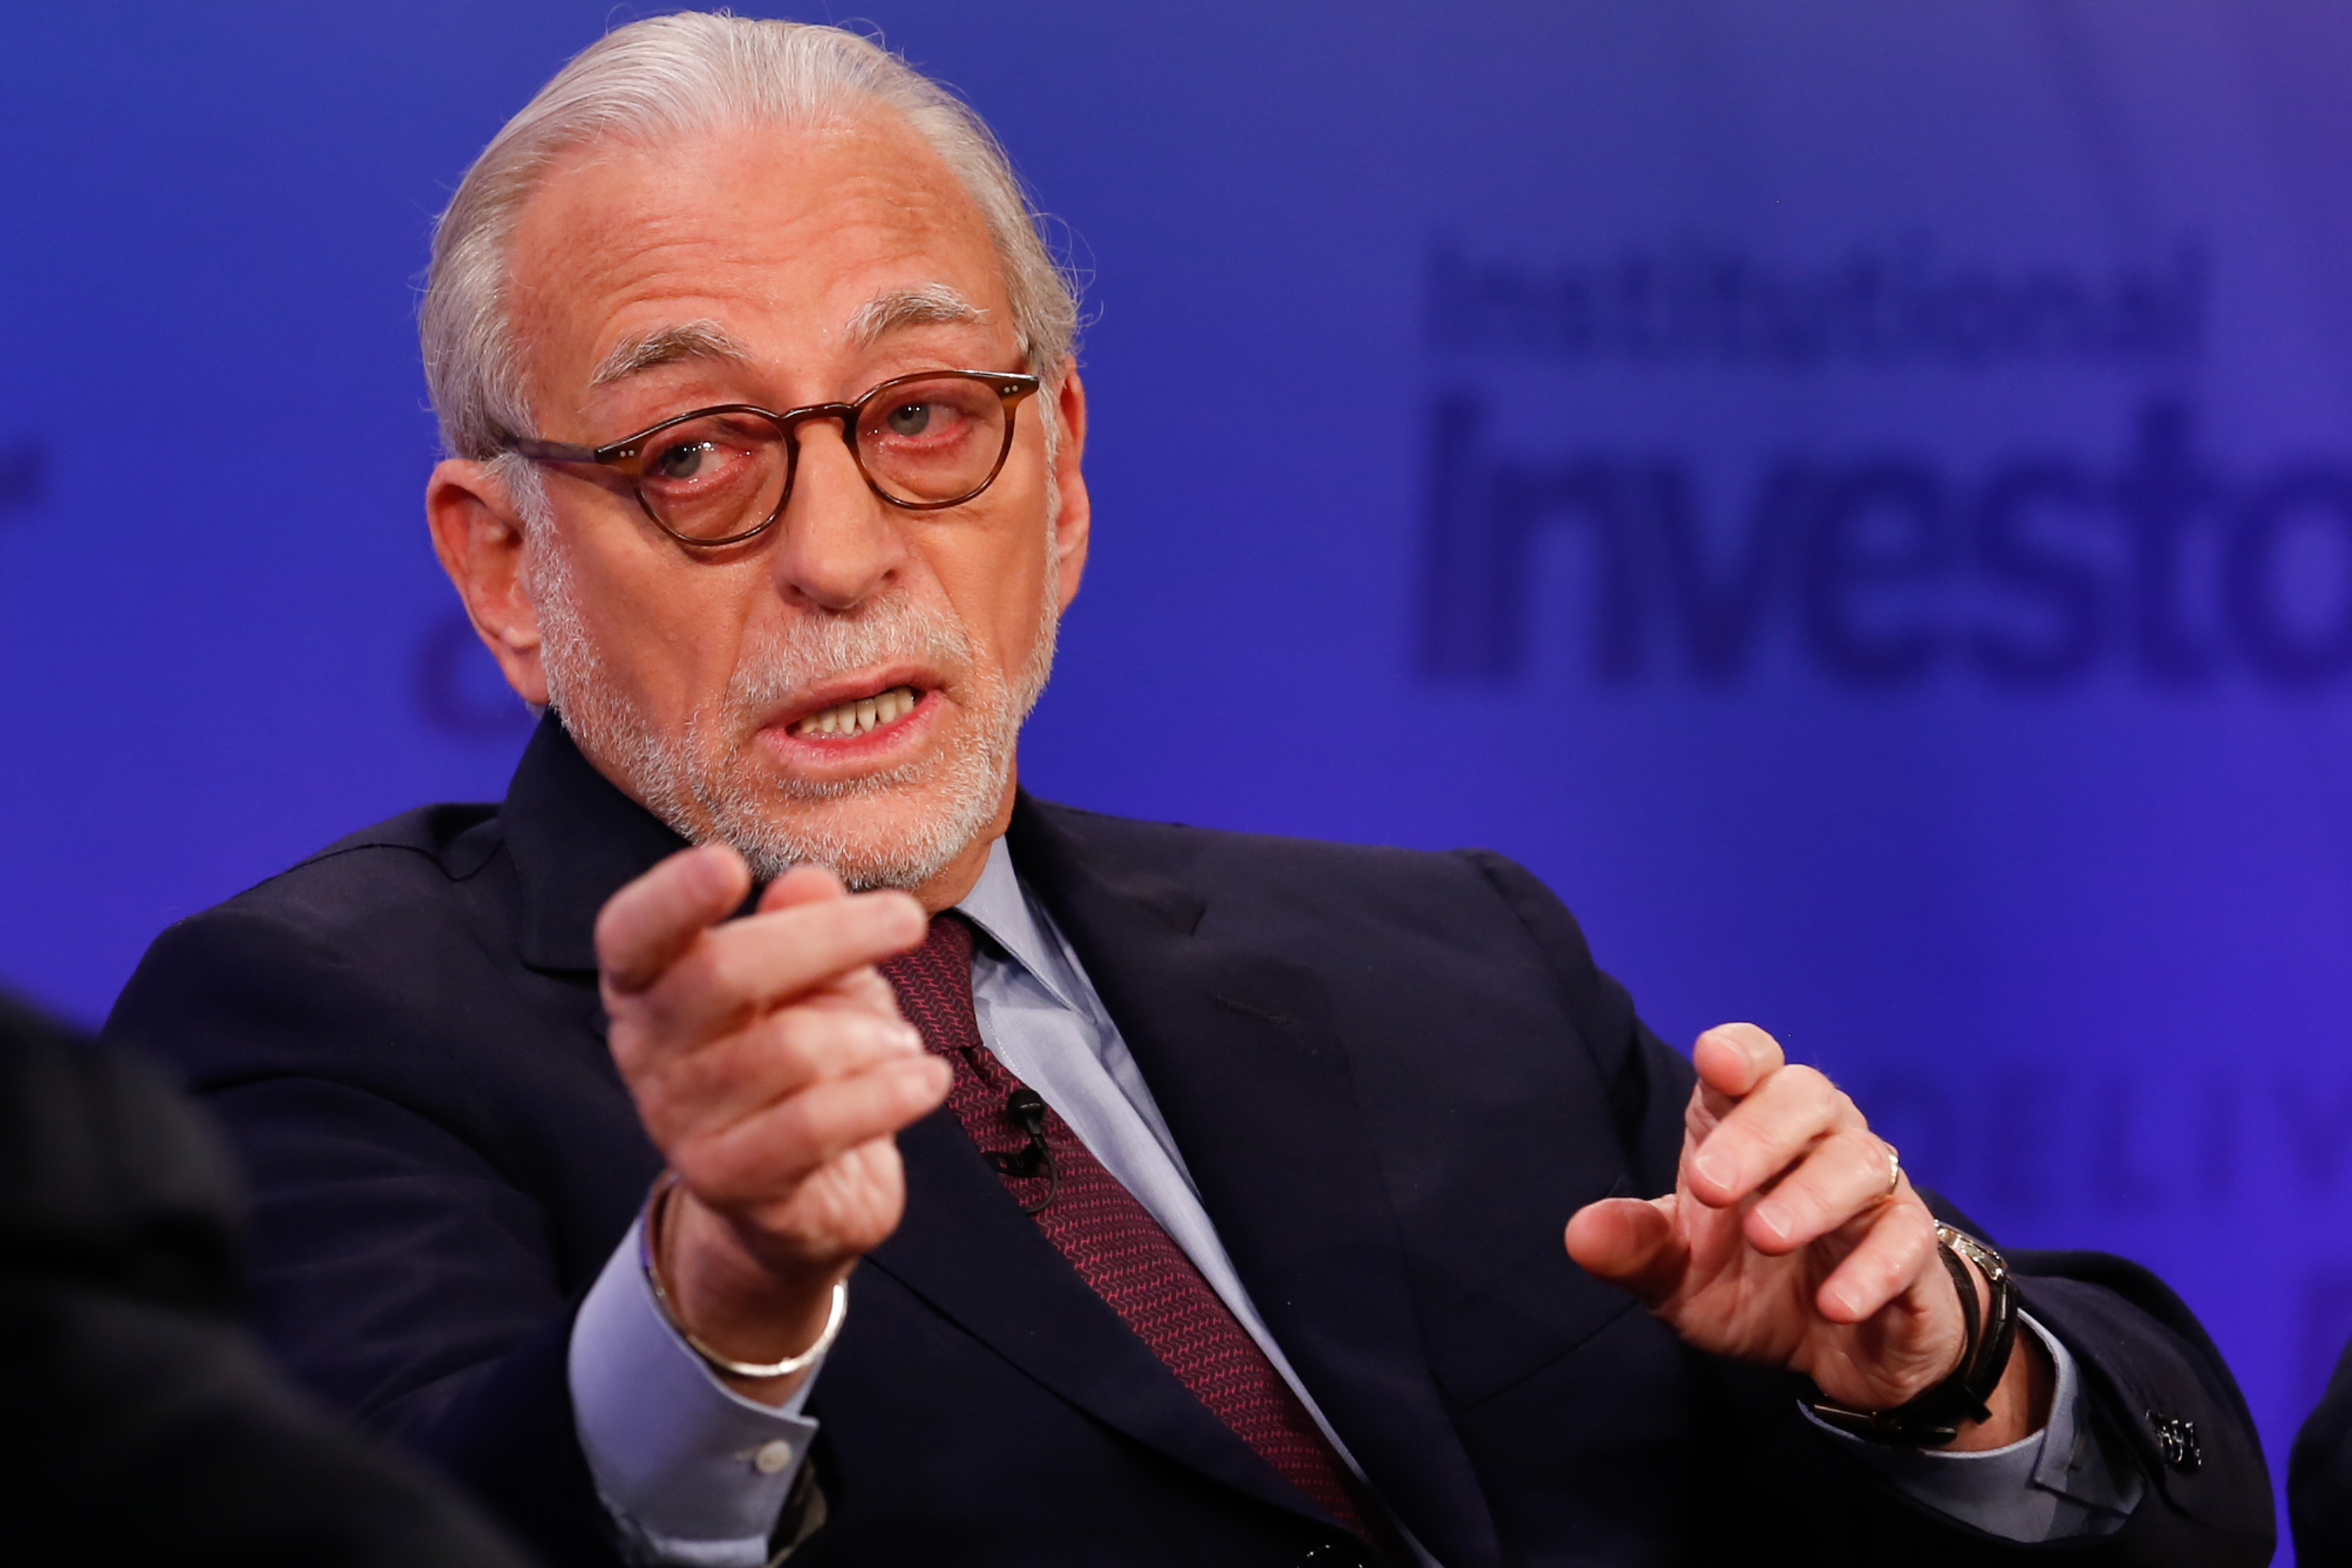 Delivering Alpha 2015 -- Pictured: Nelson Peltz, Founding Partner and CEO, Trian Fund Management, at the 2015 Delivering Alpha on July 15, 2015 -- (Photo by: David A. Grogan/CNBC/NBCU Photo Bank/NBCUniversal via Getty Images)